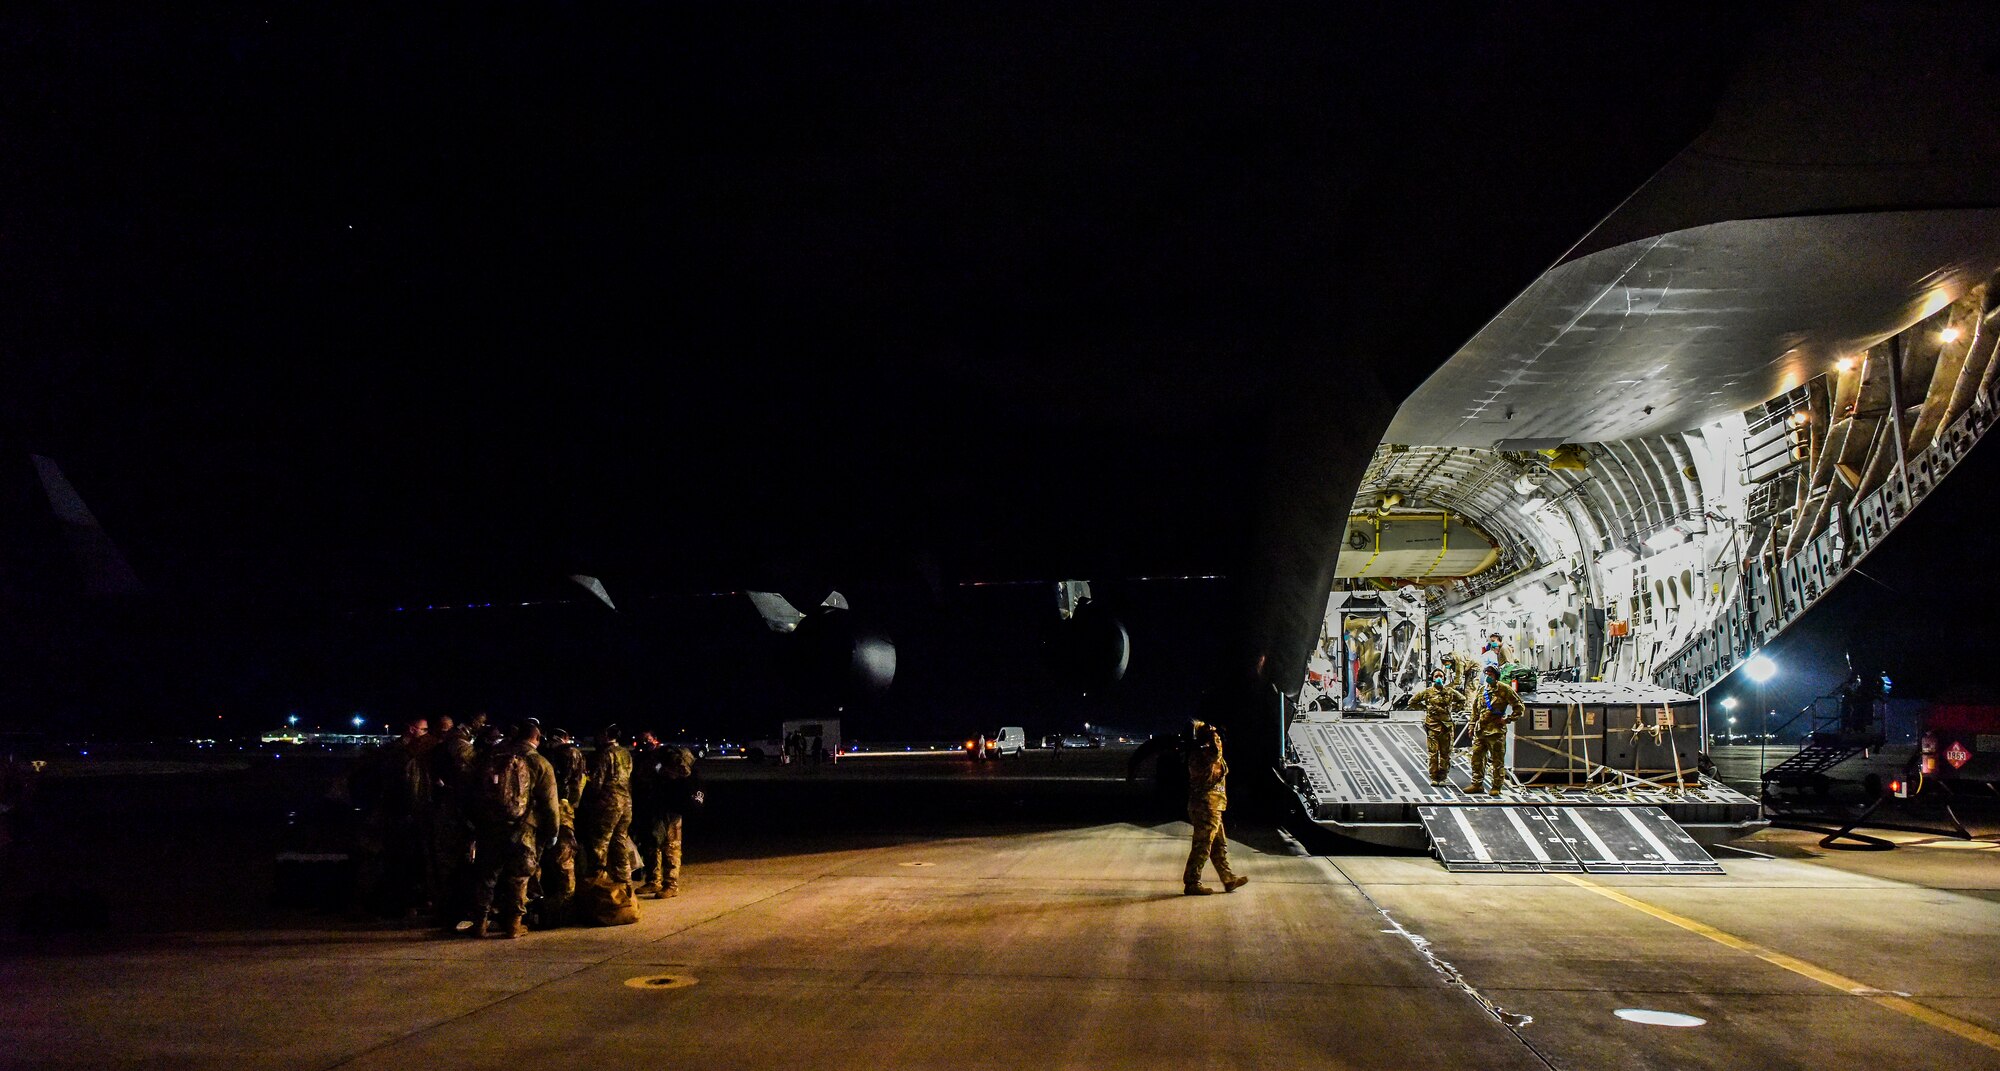 Airmen from the 60th Air Mobility Wing support a Transport Isolation System operation at Joint Base Pearl-Harbor Hickam, Hawaii, July 17, 2020. Several U.S. Air Force units came together to rapidly deploy the bio-containment capability for the first time in the Indo-Pacific theater in support of a COVID-19 aeromedical evacuation mission. The TIS is an infectious disease containment unit designed to minimize contamination risk to aircrew and medical attendants, while allowing in-flight medical care for patients afflicted by a disease. (U.S. Air Force photo by Tech. Sgt. Anthony Nelson Jr.)